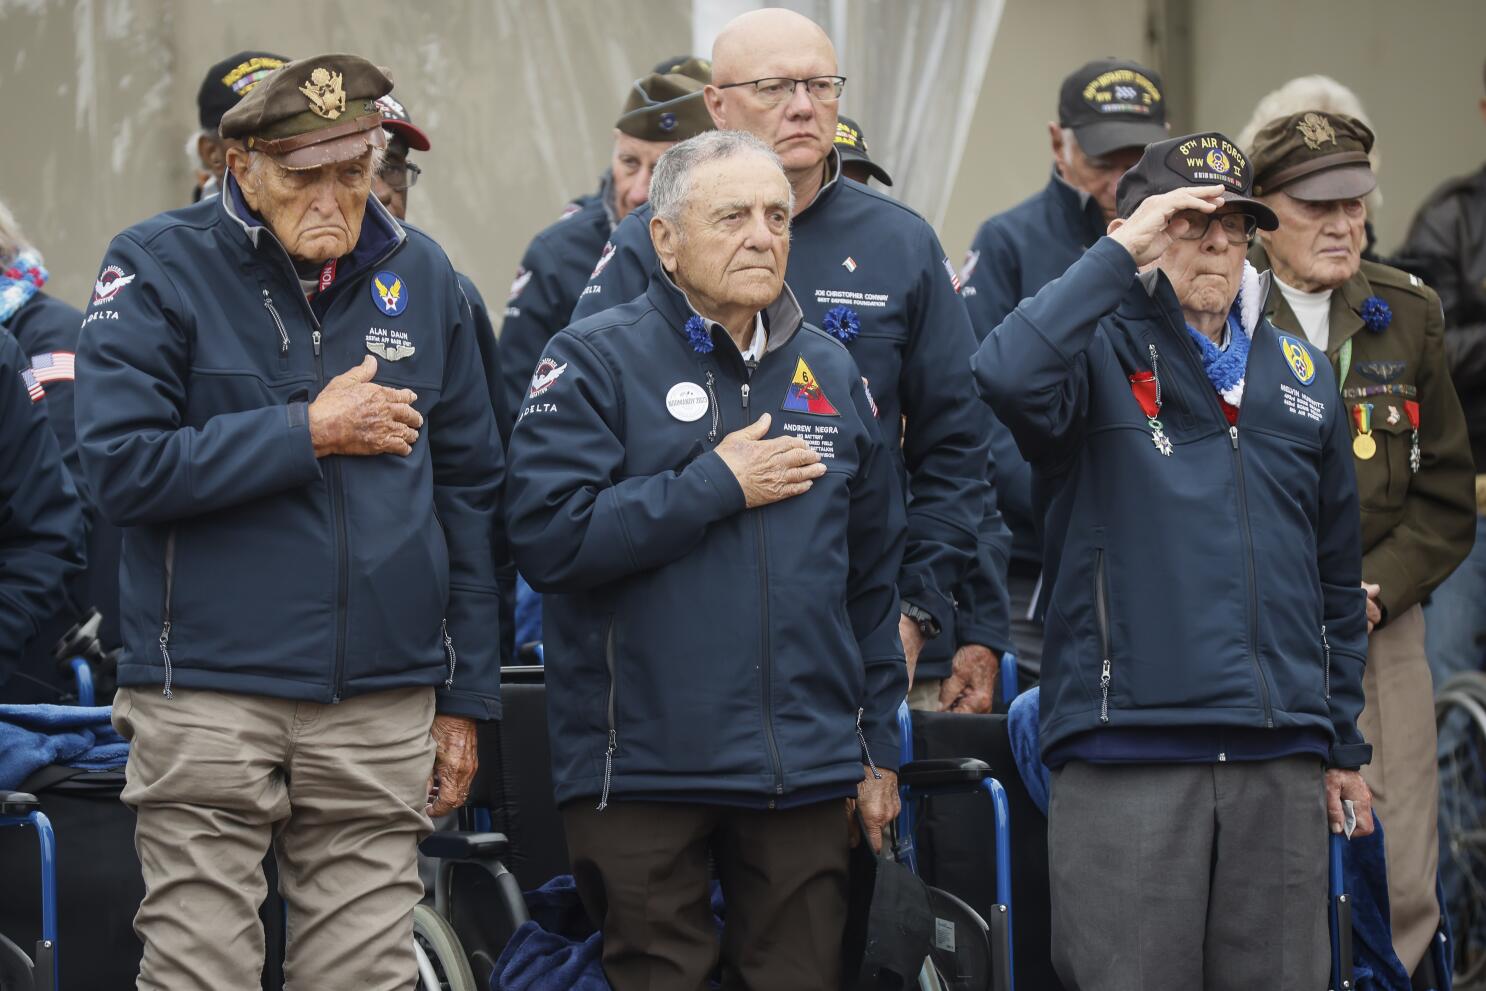 70th anniversary of D-day: What does the 'D' stand for? - Los Angeles Times